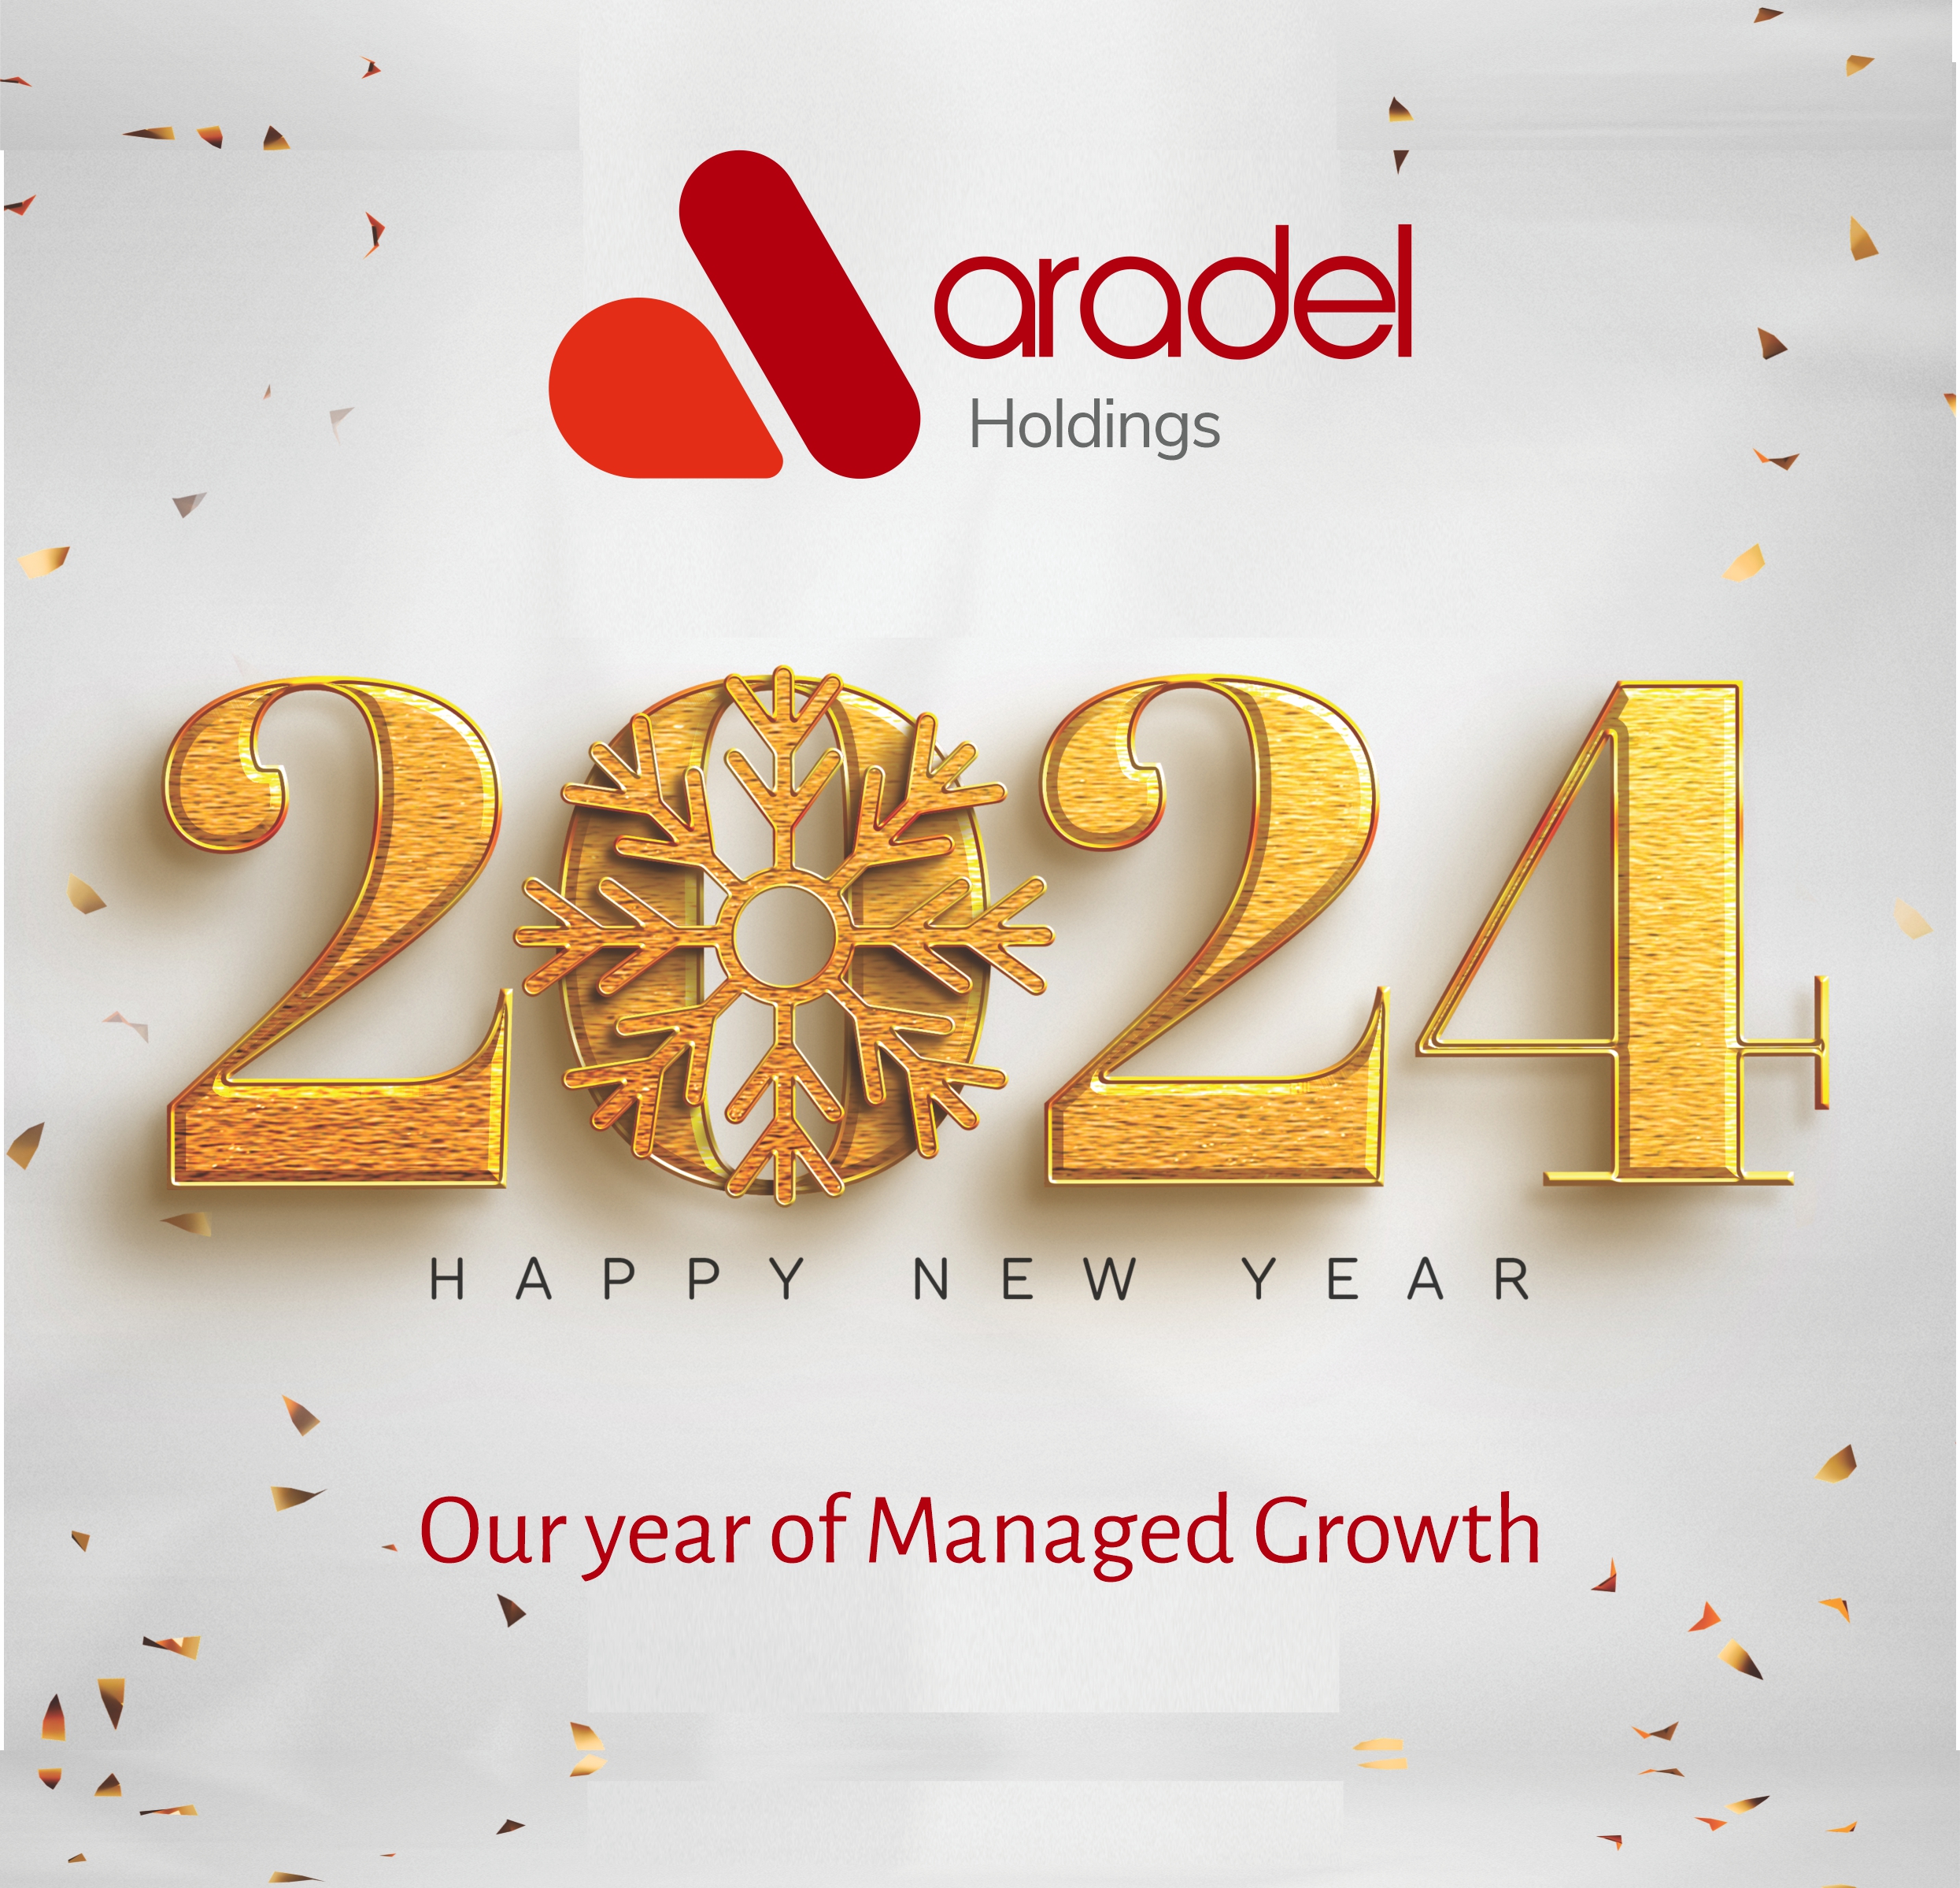 New Year Message from Aradel Holdings CEO